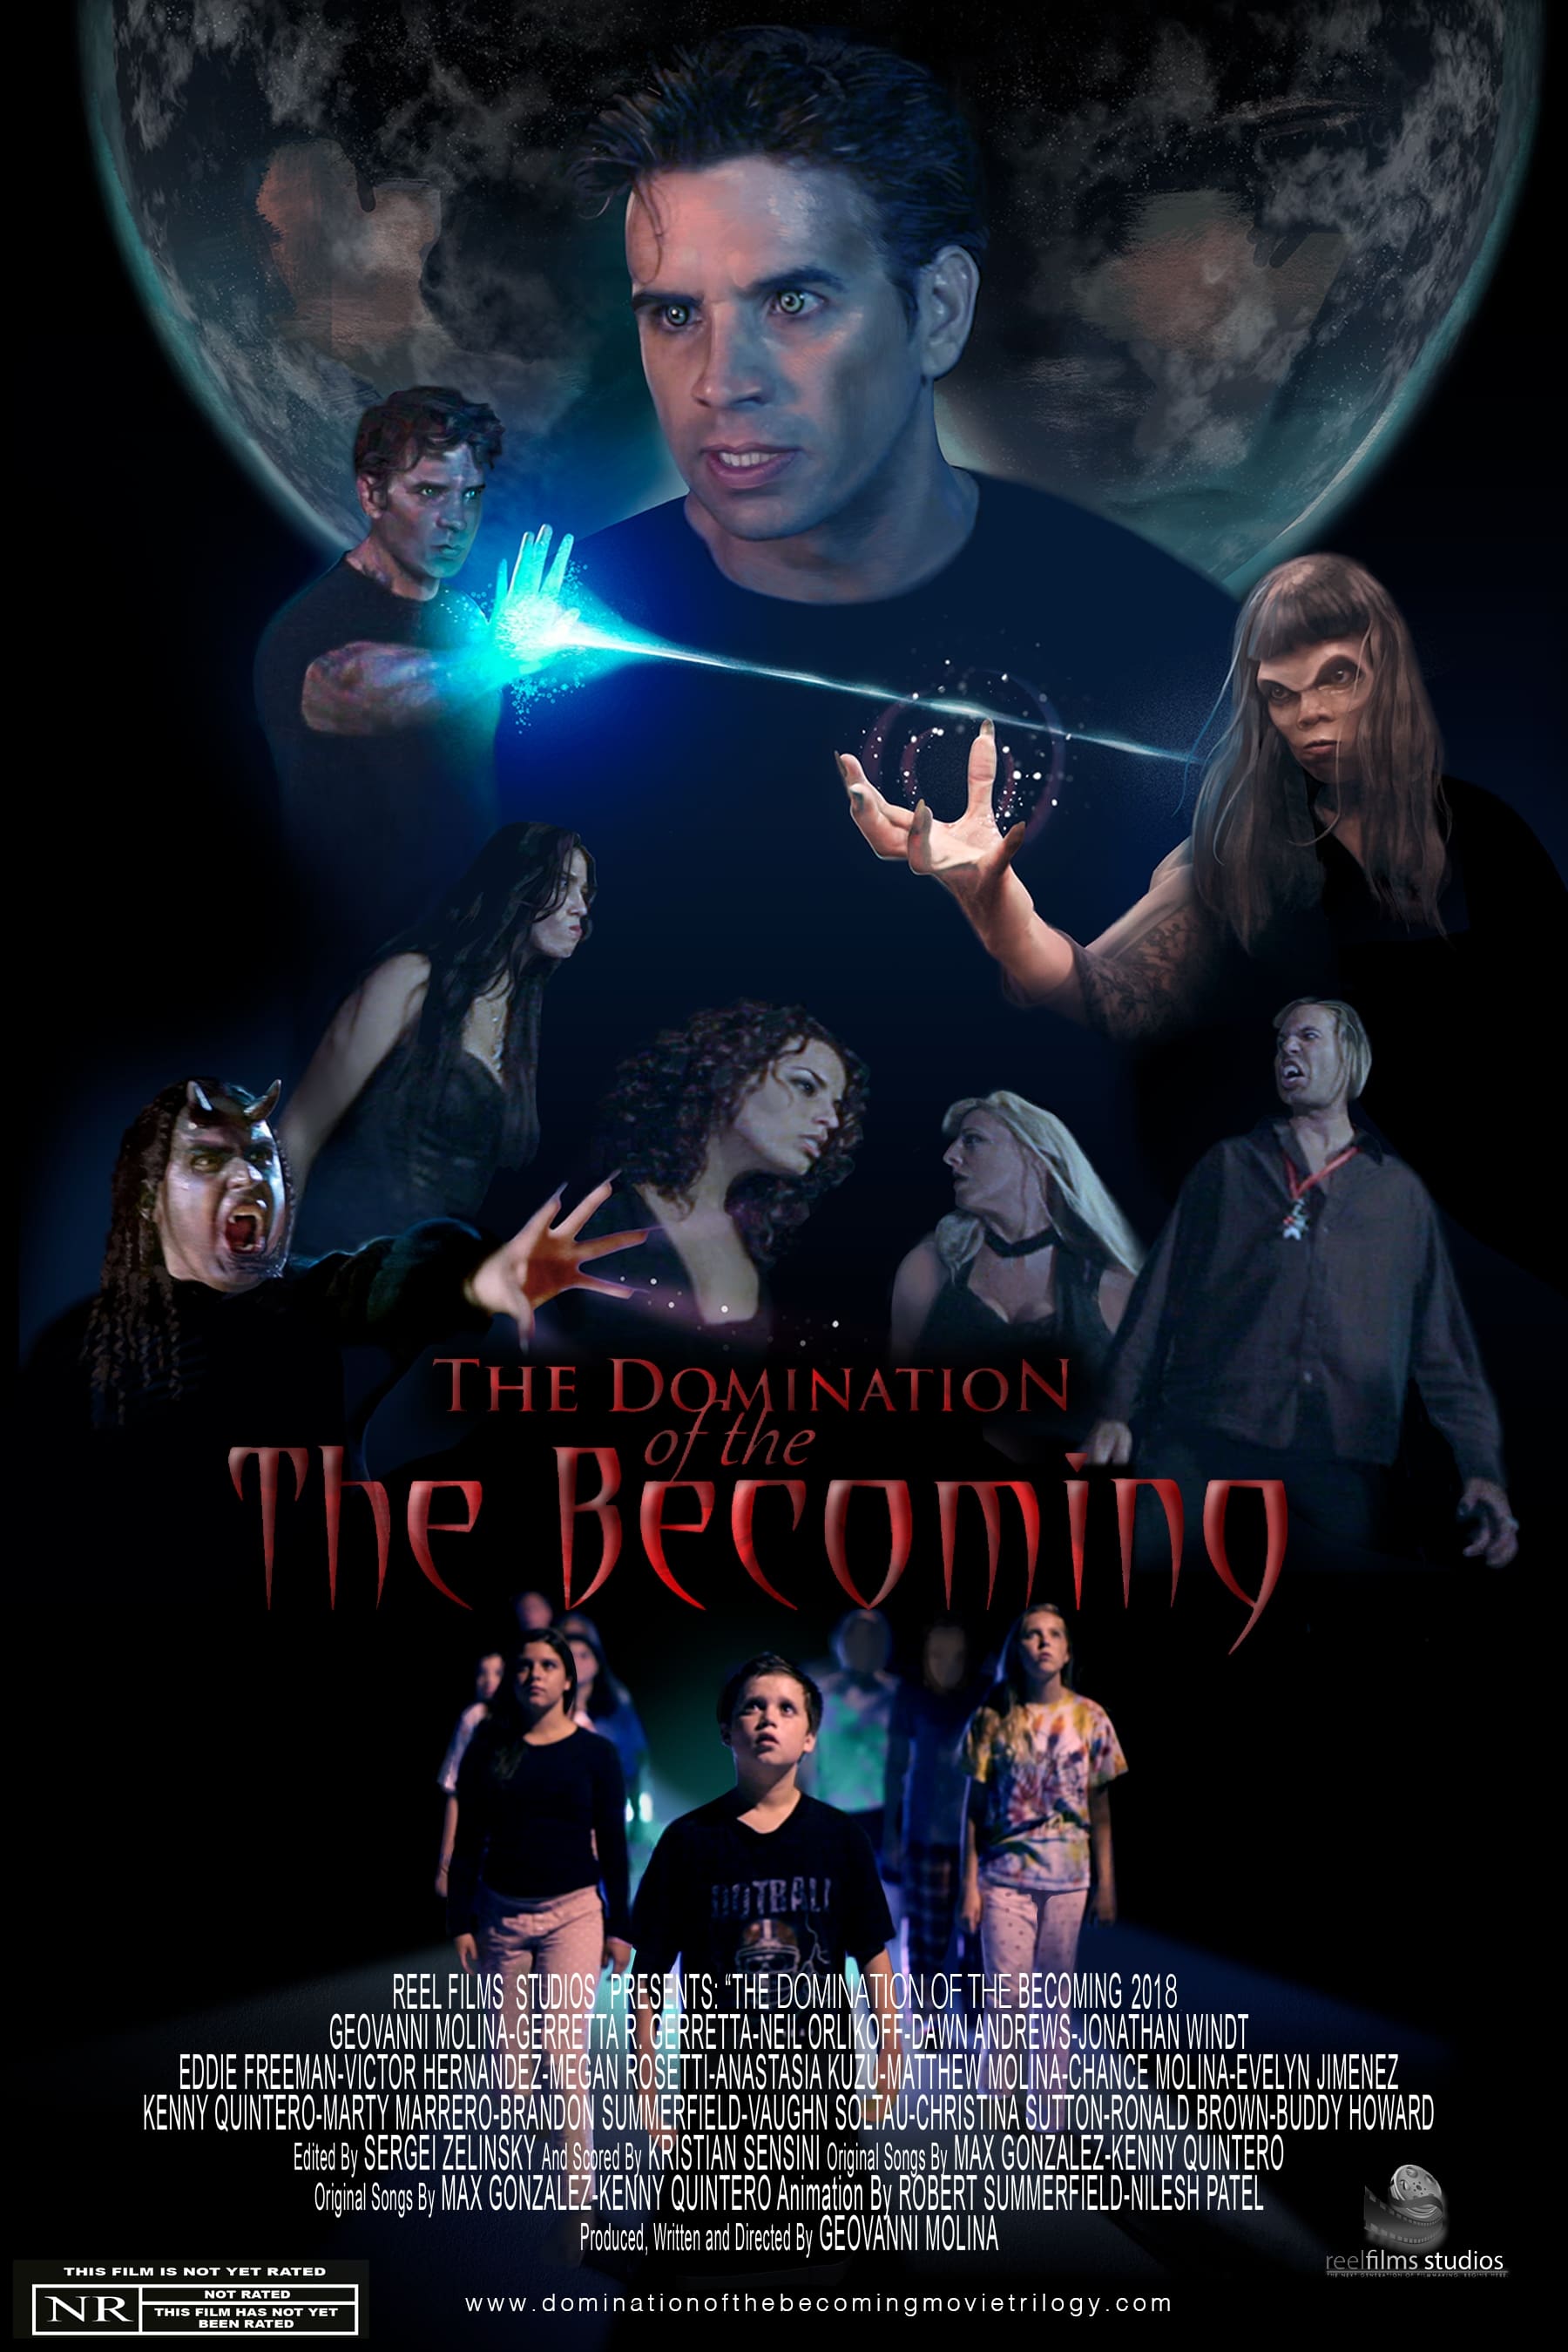 The Domination of the Becoming